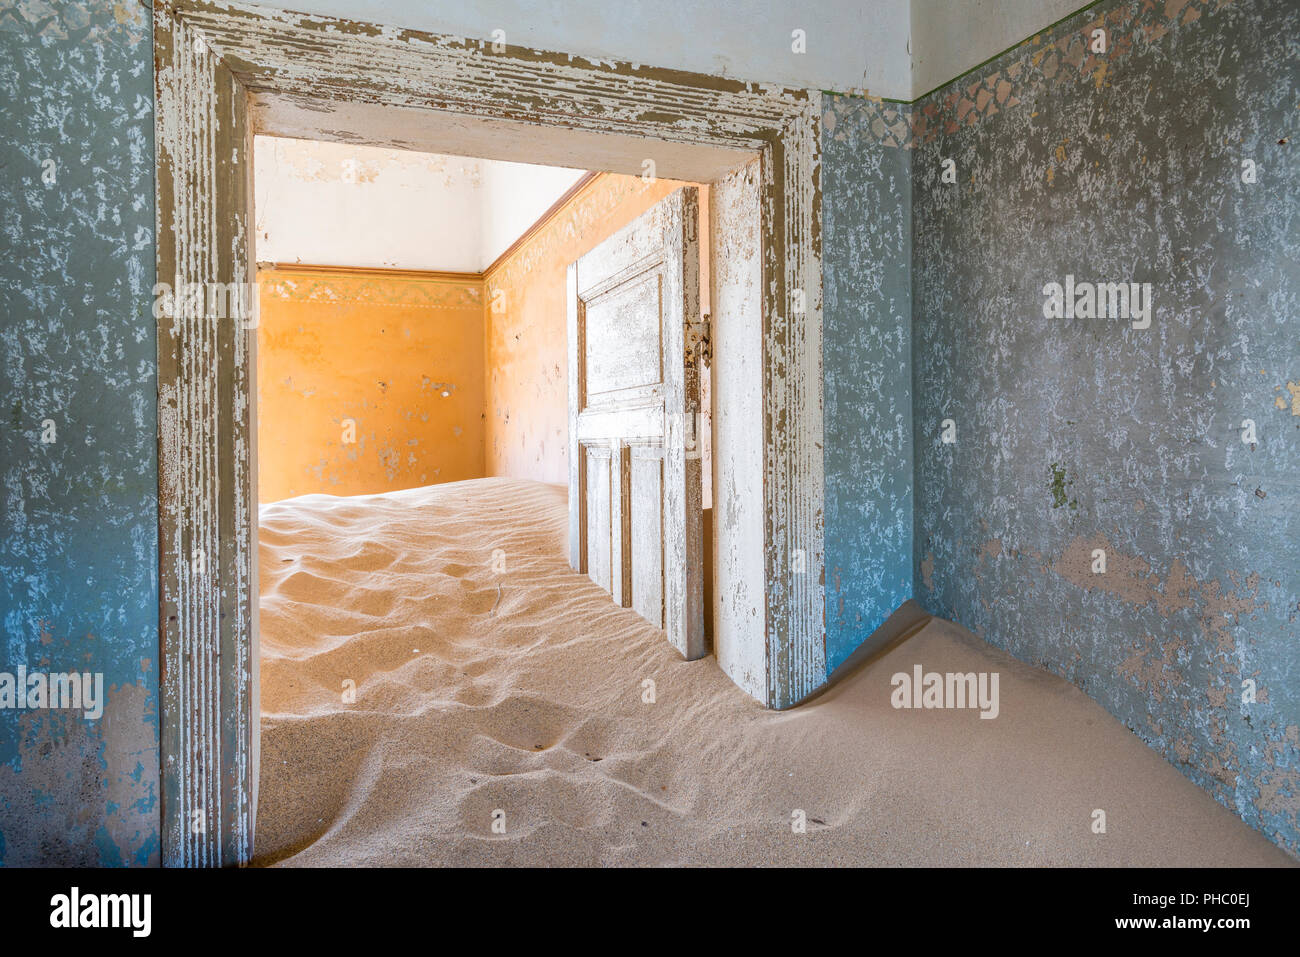 The interior of a building in the abandoned diamond mining ghost town of Kolmanskop, Namibia, Africa Stock Photo